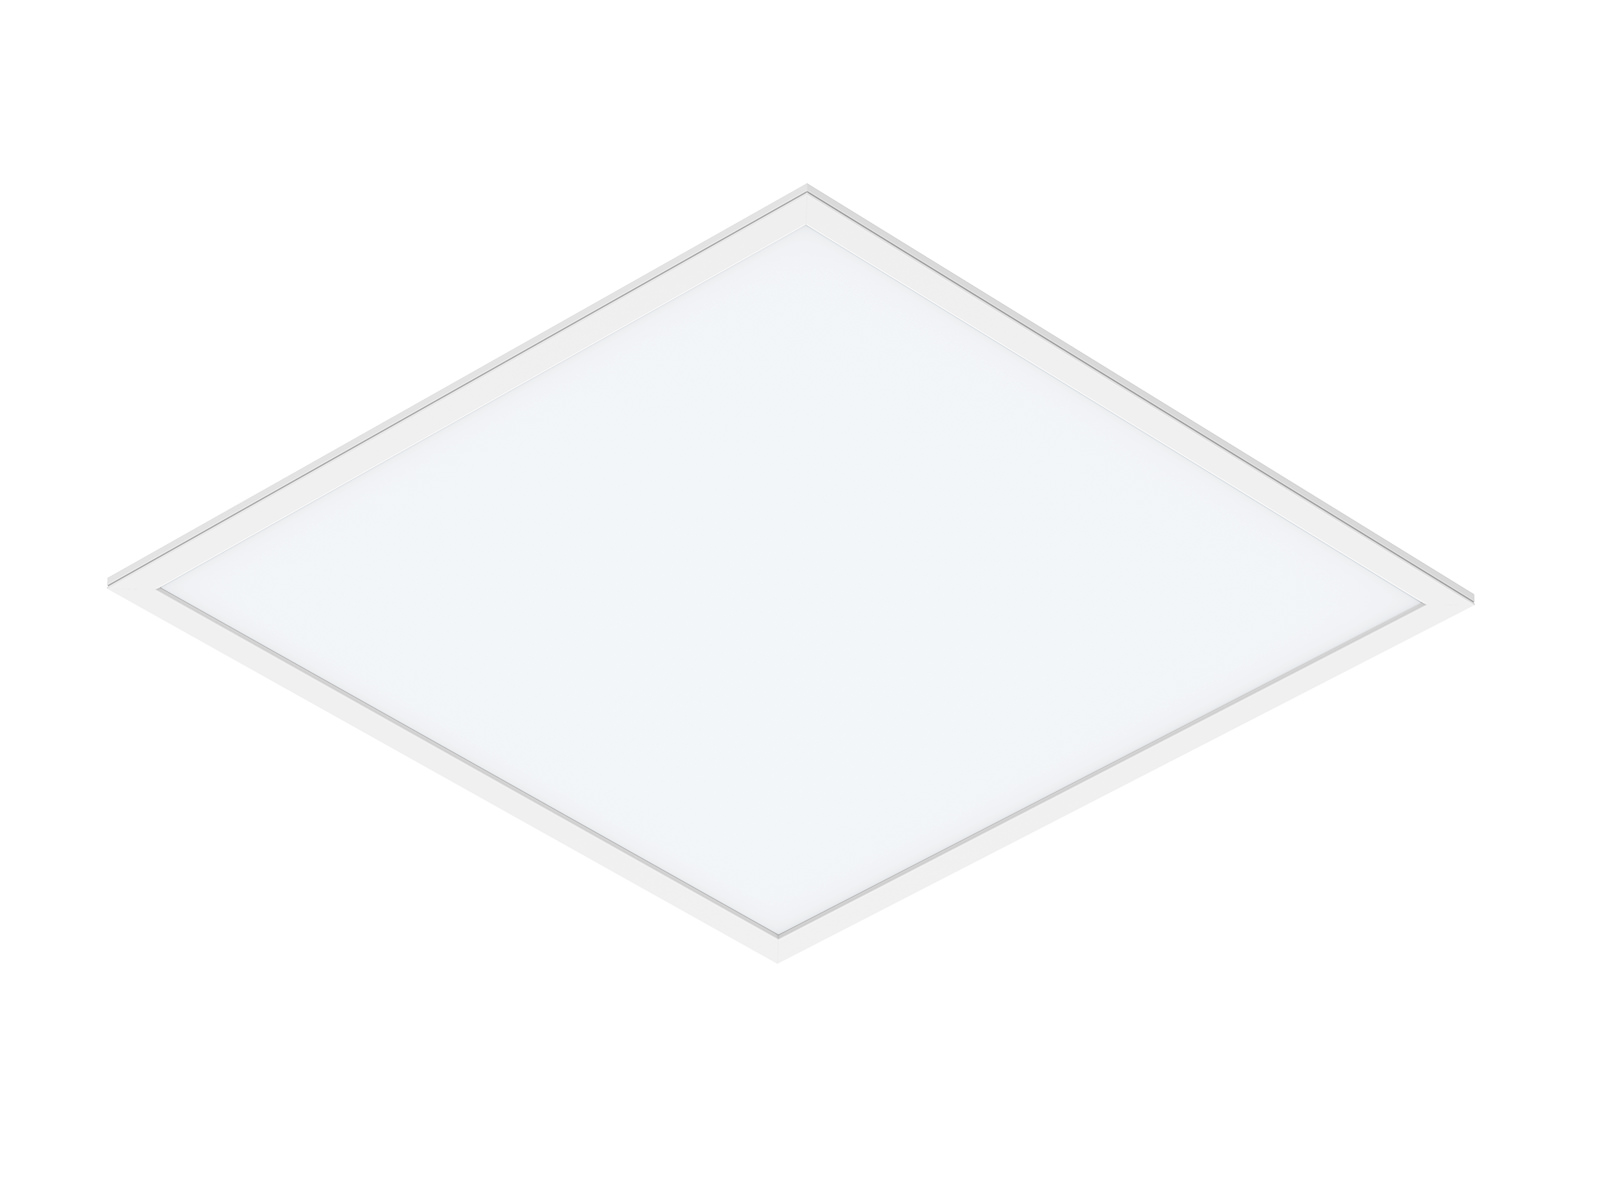 6 X 50W LED 600 x 600mm Ceiling Panel Light Office Recessed Light  5000 LM UK 